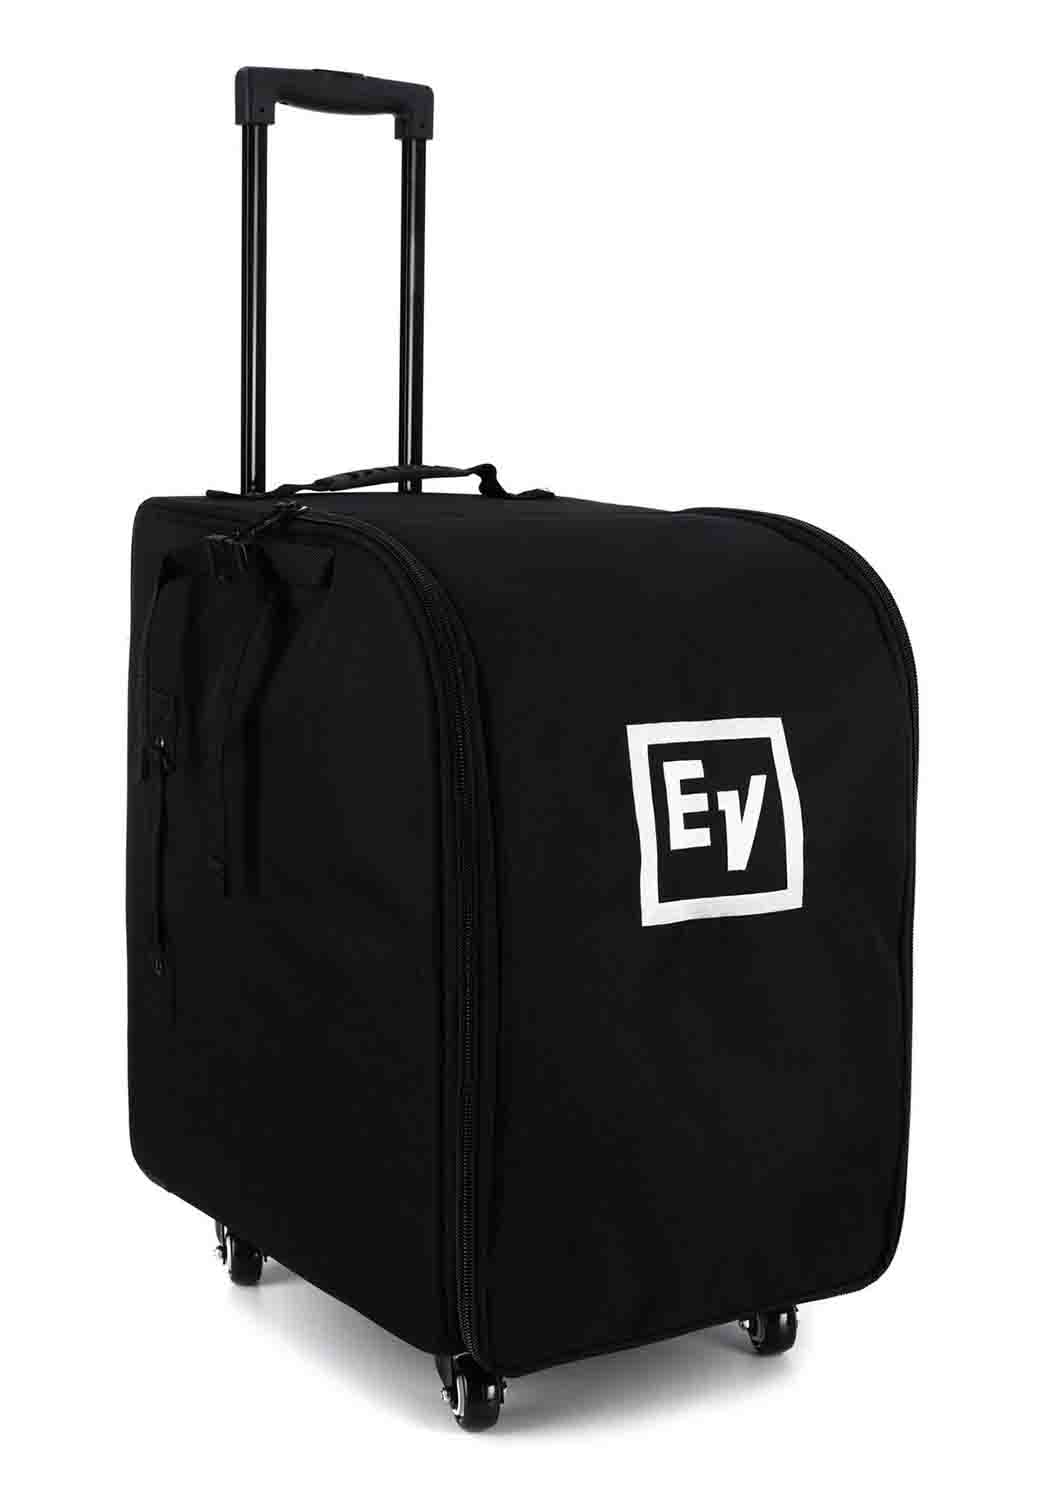 Electro-Voice EVOLVE30M-CASE, Carrying Case with Wheels for Evolve 30M Subwoofer - Hollywood DJ